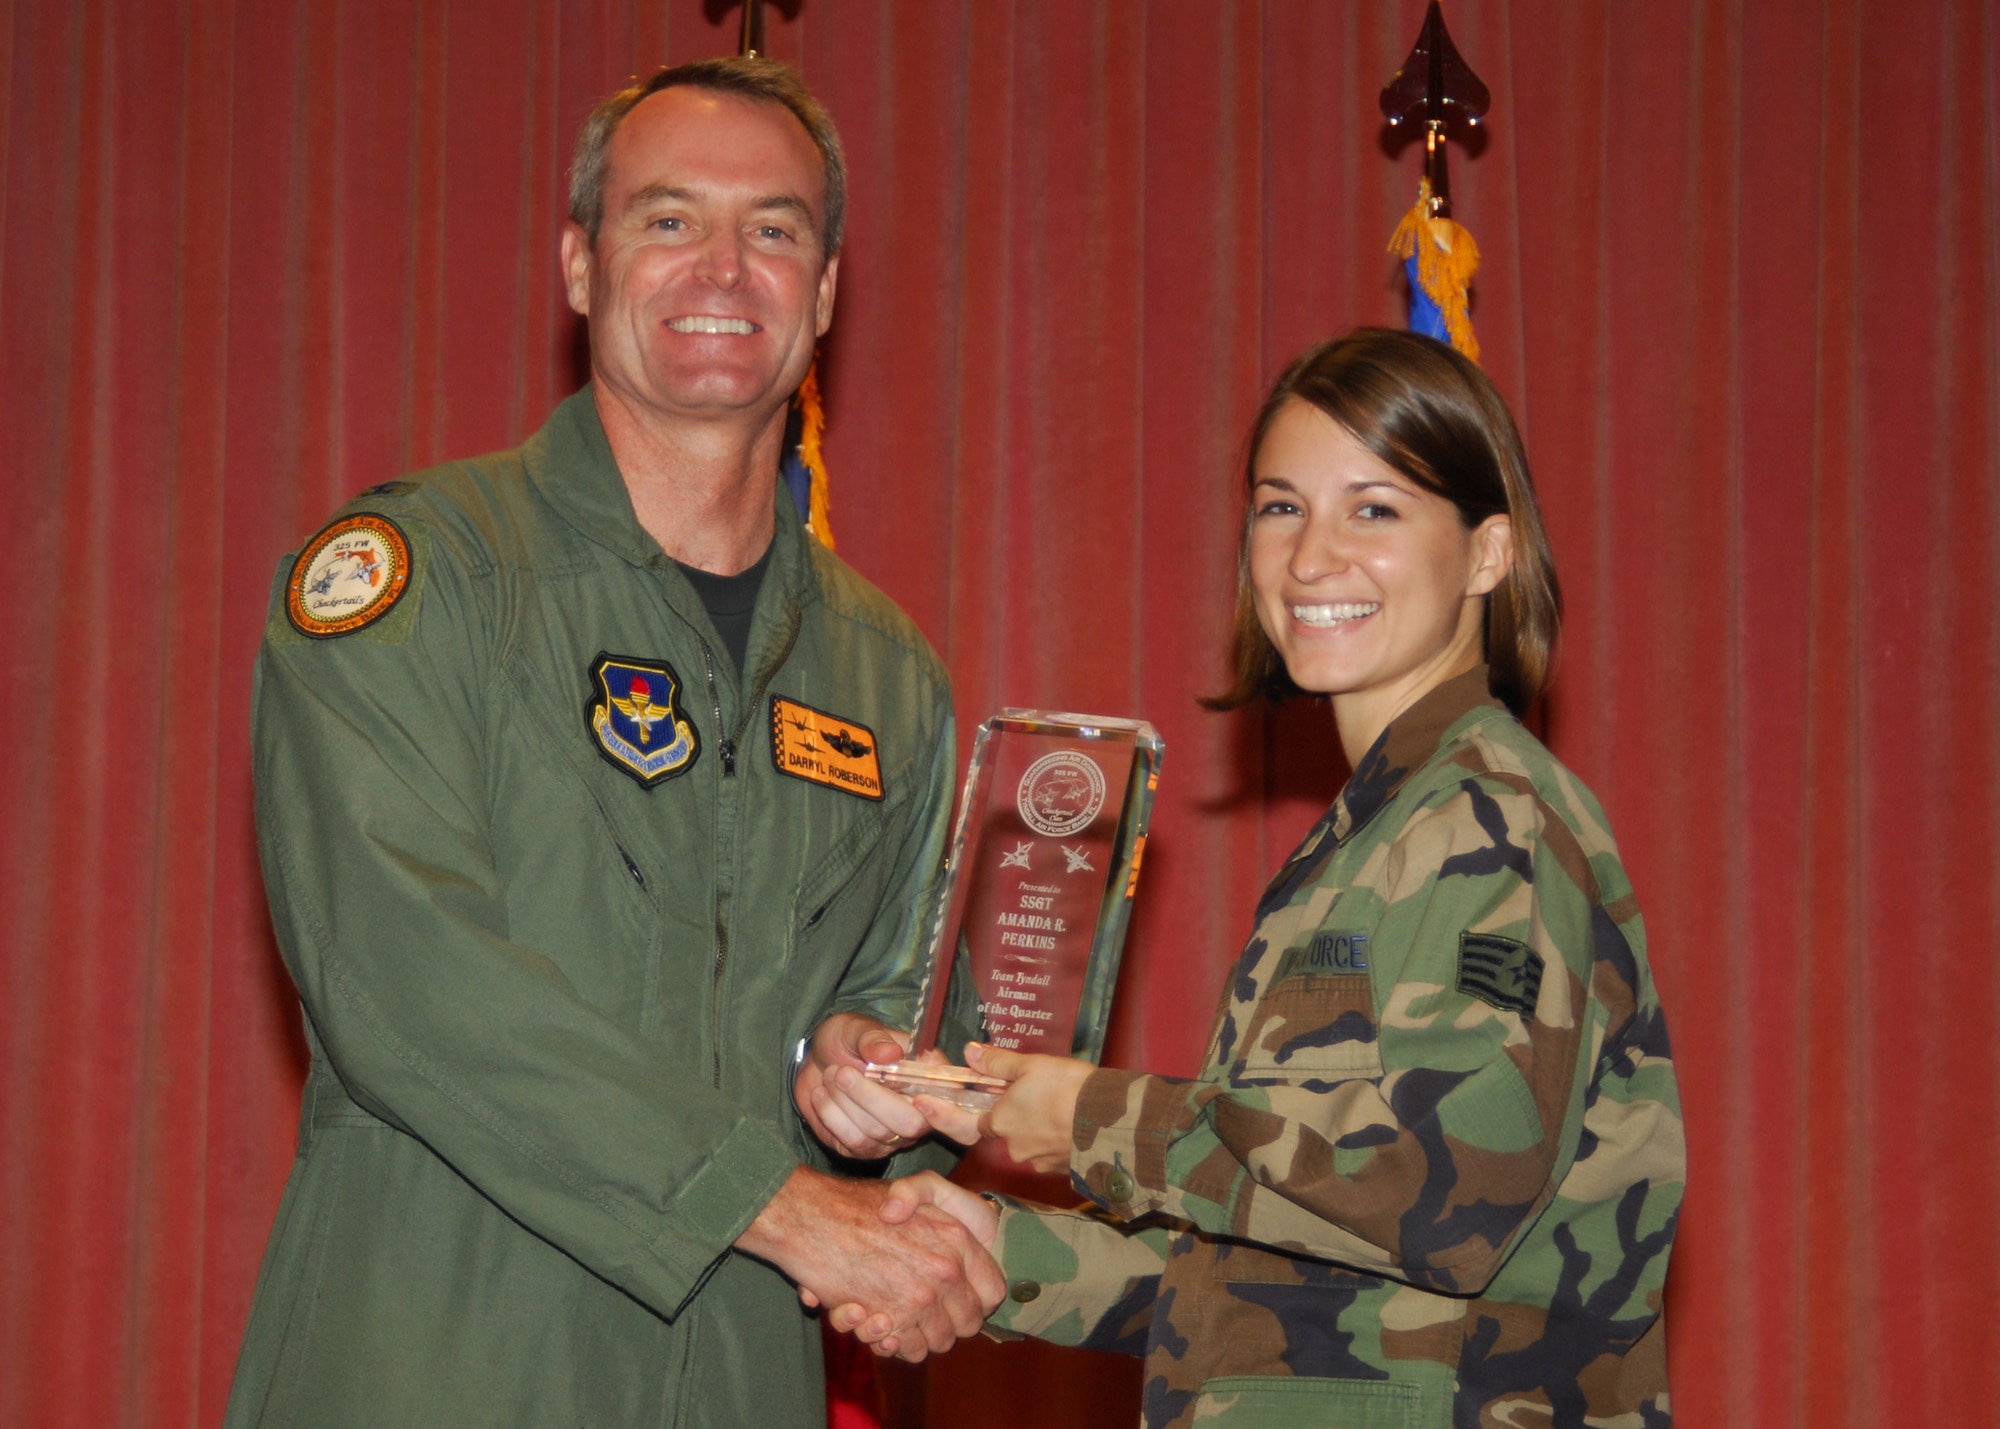 SSgt Amanda Perkins receiving the Tyndall Airman the Quarter award from Col Roberson of the 325th wing at the Quarterly Awards Luncheon July 28, 2008. Photo by Lisa Norman.